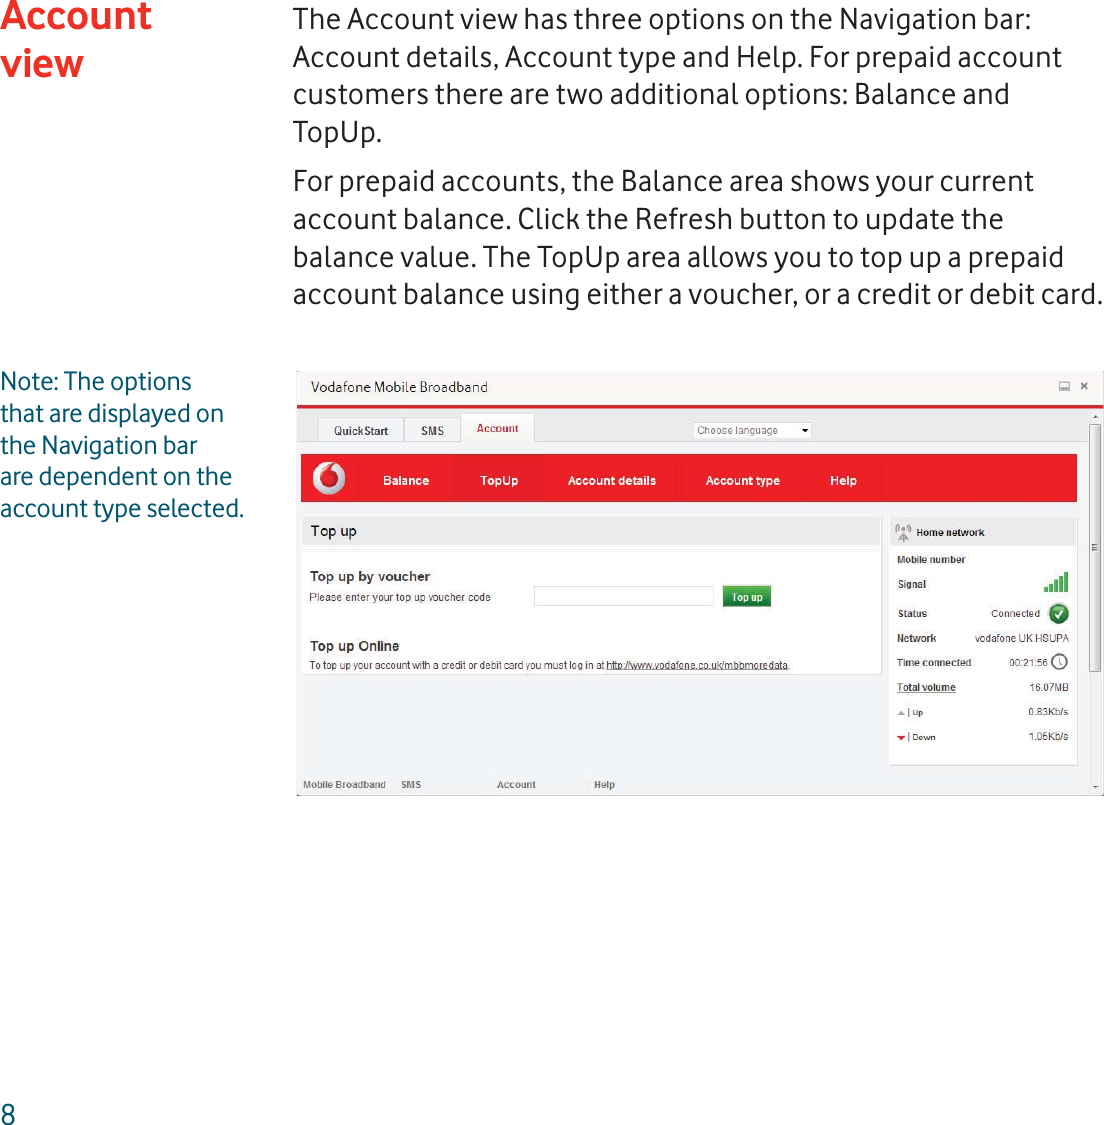 8The Account view has three options on the Navigation bar: Account details, Account type and Help. For prepaid account customers there are two additional options: Balance and TopUp.For prepaid accounts, the Balance area shows your current account balance. Click the Refresh button to update the balance value. The TopUp area allows you to top up a prepaid account balance using either a voucher, or a credit or debit card.Note: The options that are displayed on the Navigation bar are dependent on the account type selected.Account view